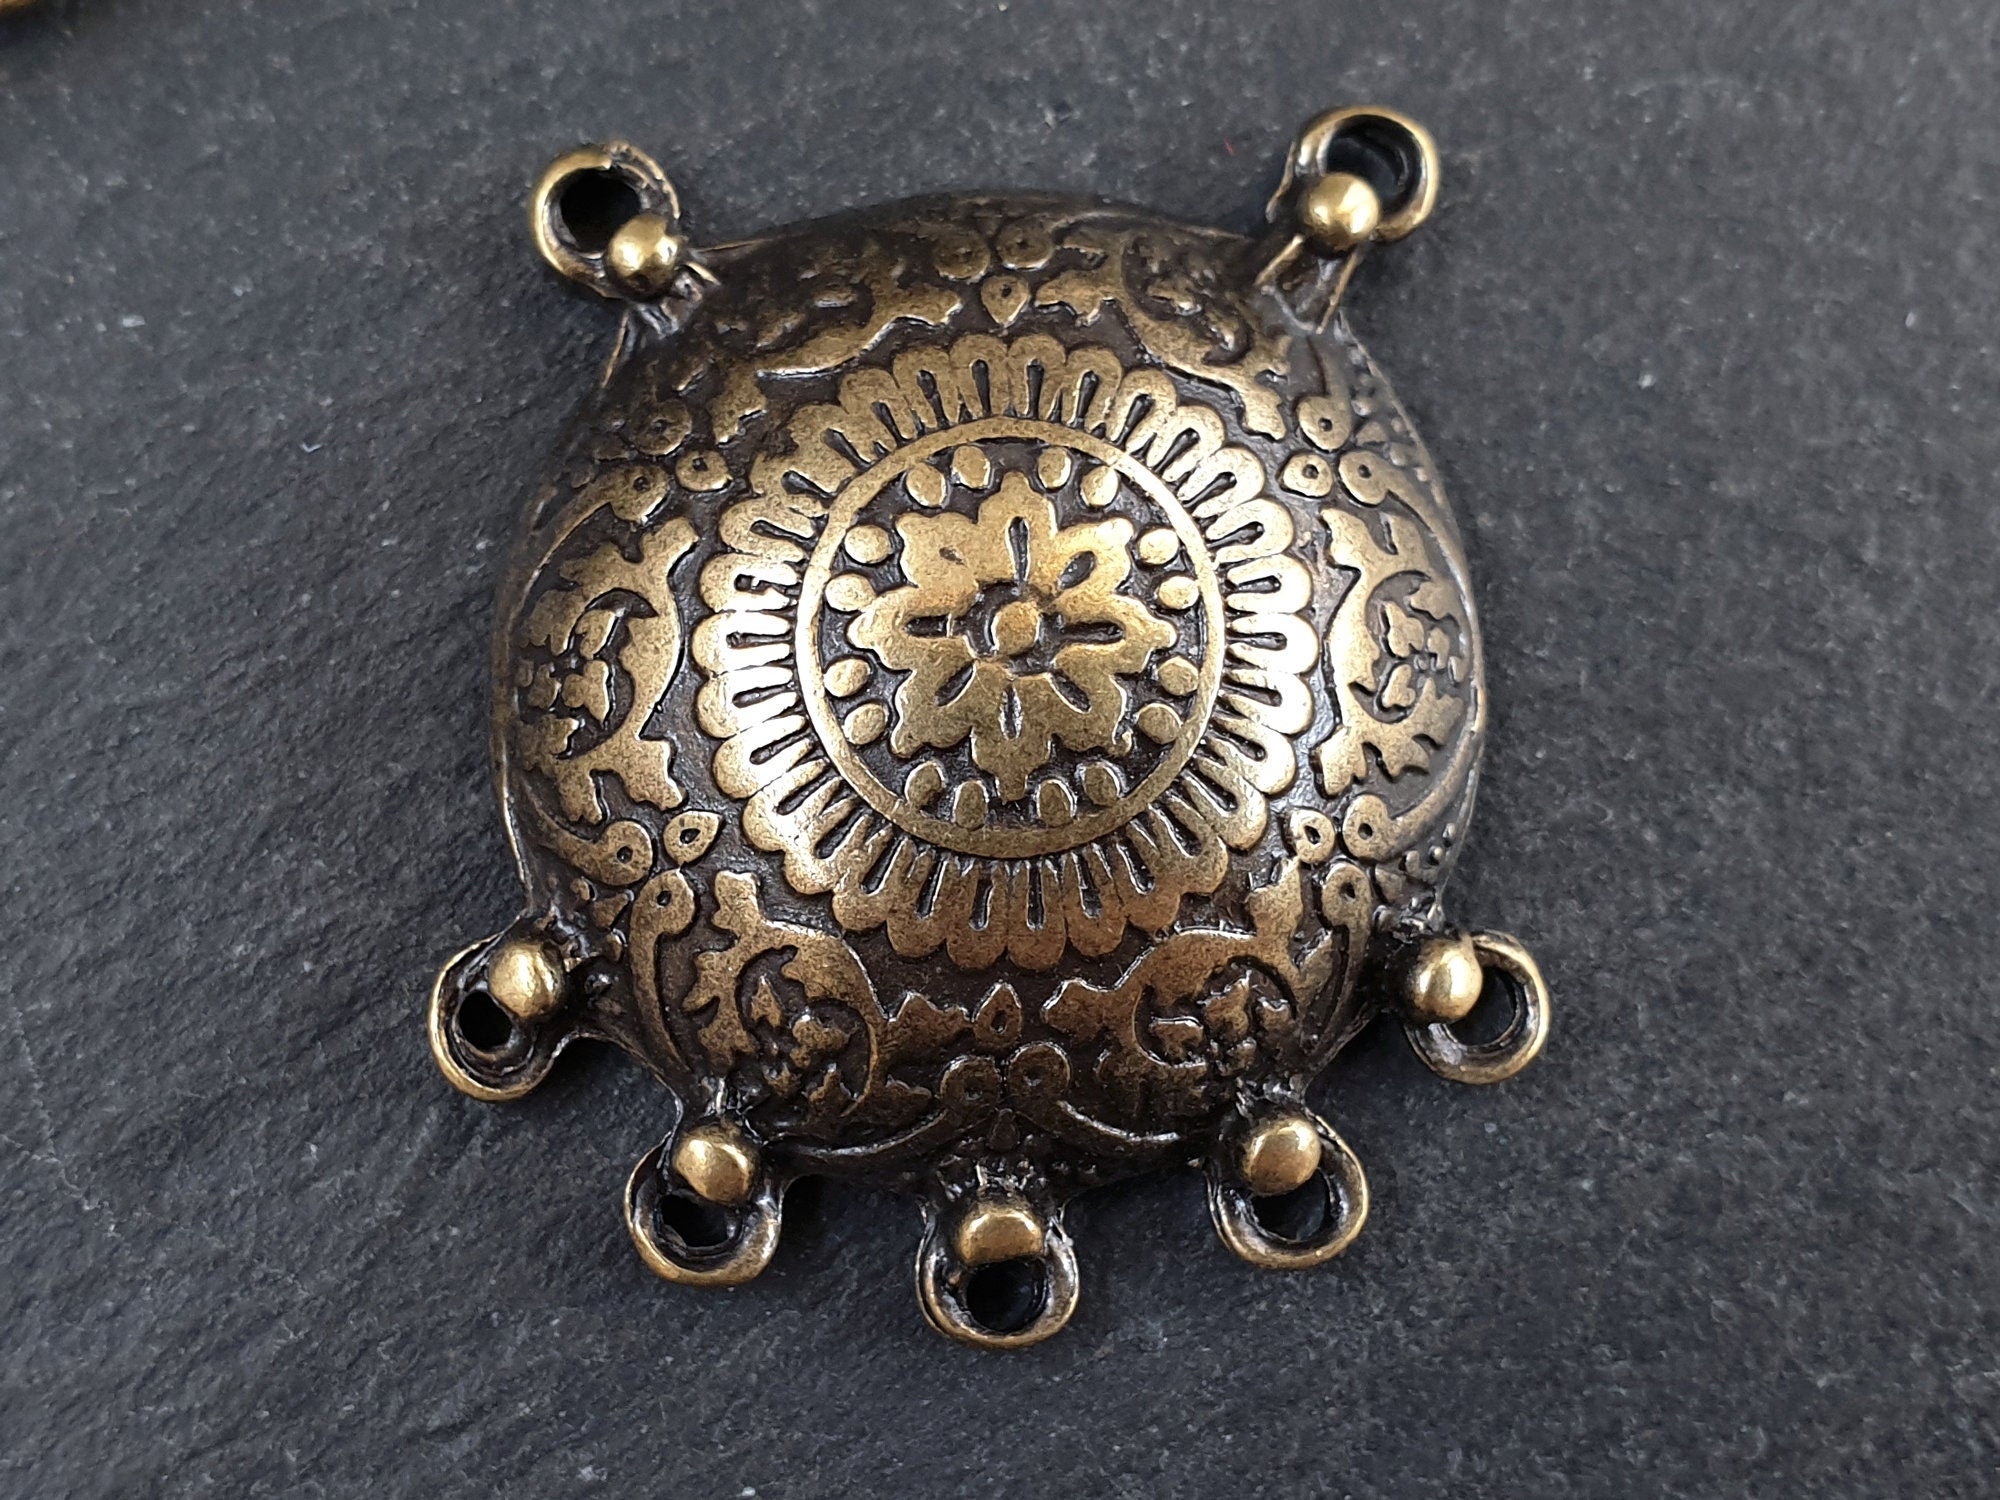 Round Dome Mandala Pendant, Chandelier Strand Connector with 5 Loops, Floral Folk Boho Style, Antique Bronze Plated - 1PC